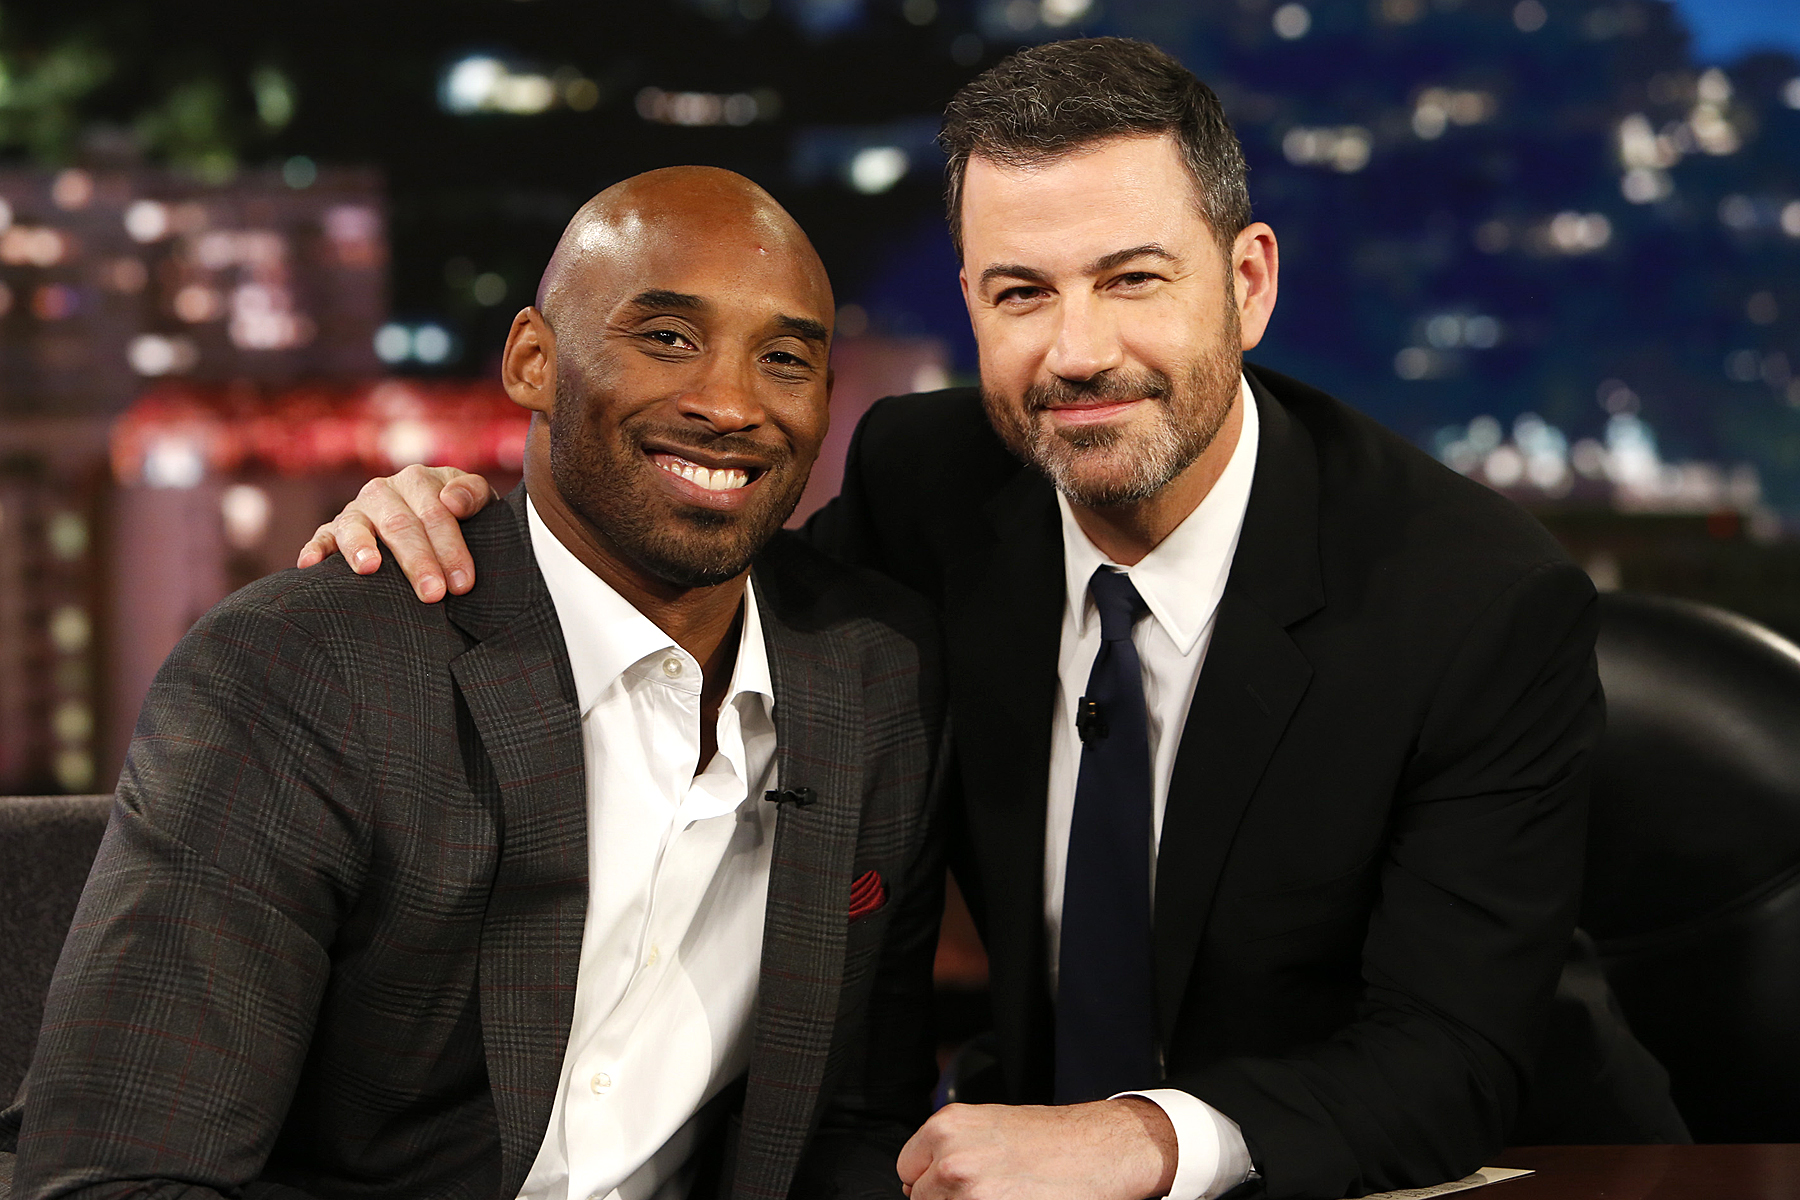 Jimmy Kimmel Films Without Live Audience to Honor Kobe Bryant: ‘A Comedy Show Didn’t Feel Right’